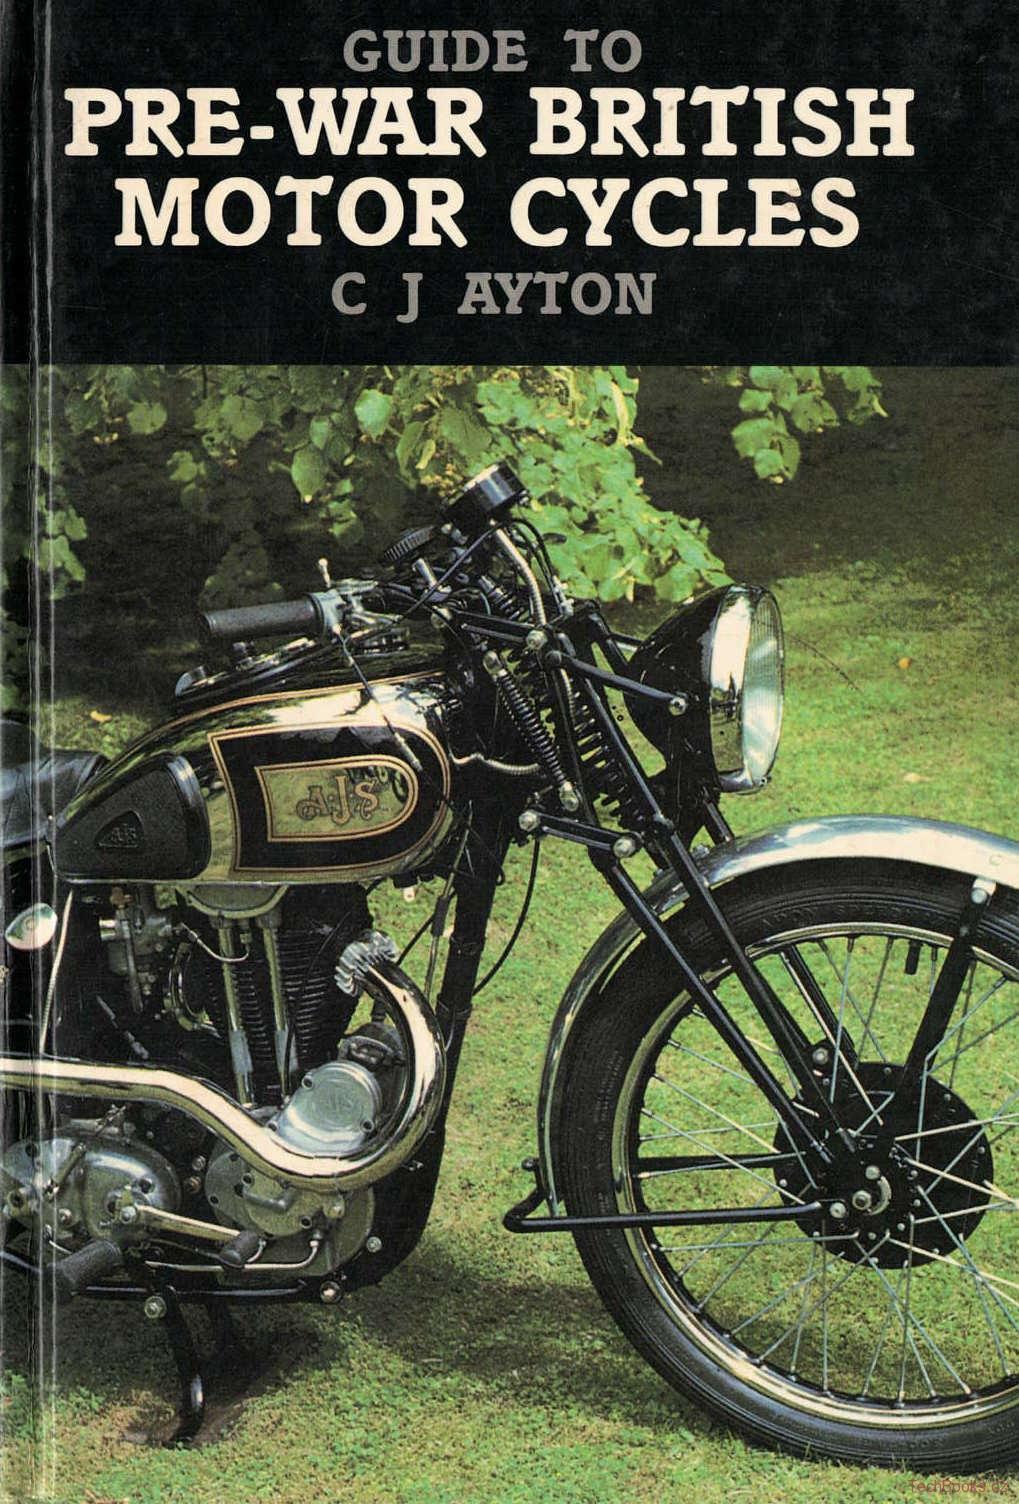 Guide to Pre-War British Motor Cycles